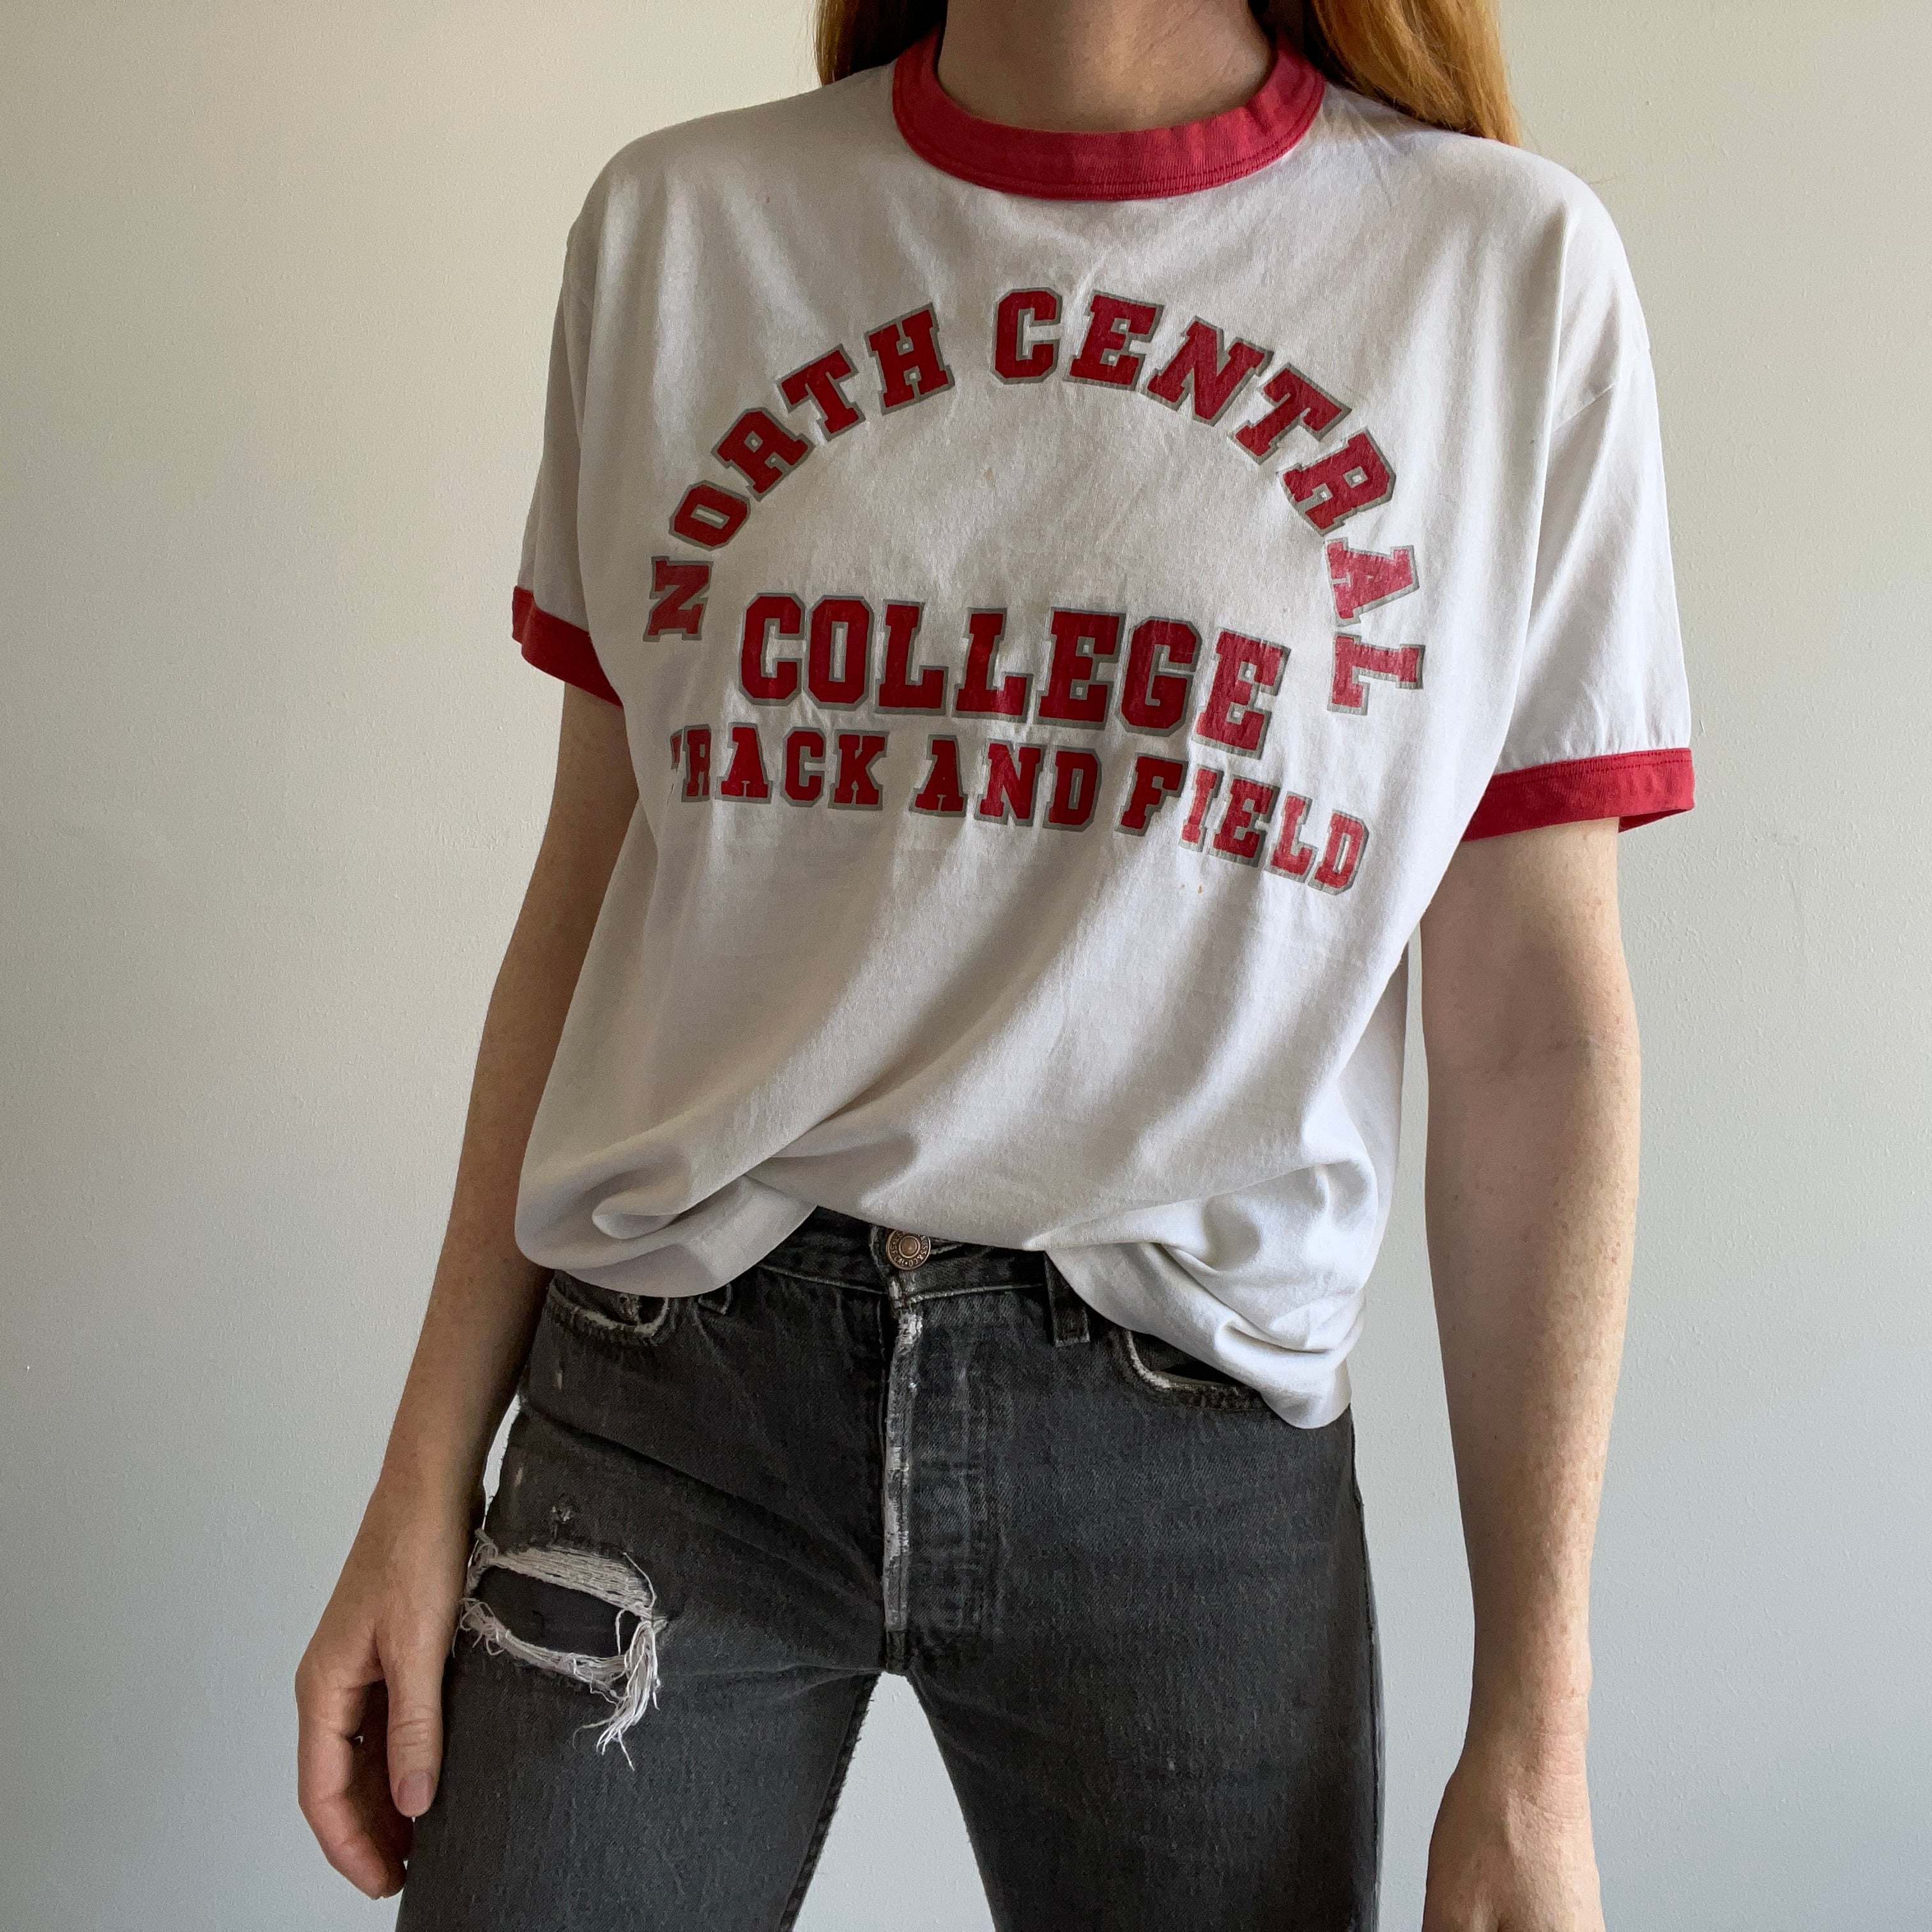 1980s North Central College Track and Field by Tee Jays Ring T-Shirt